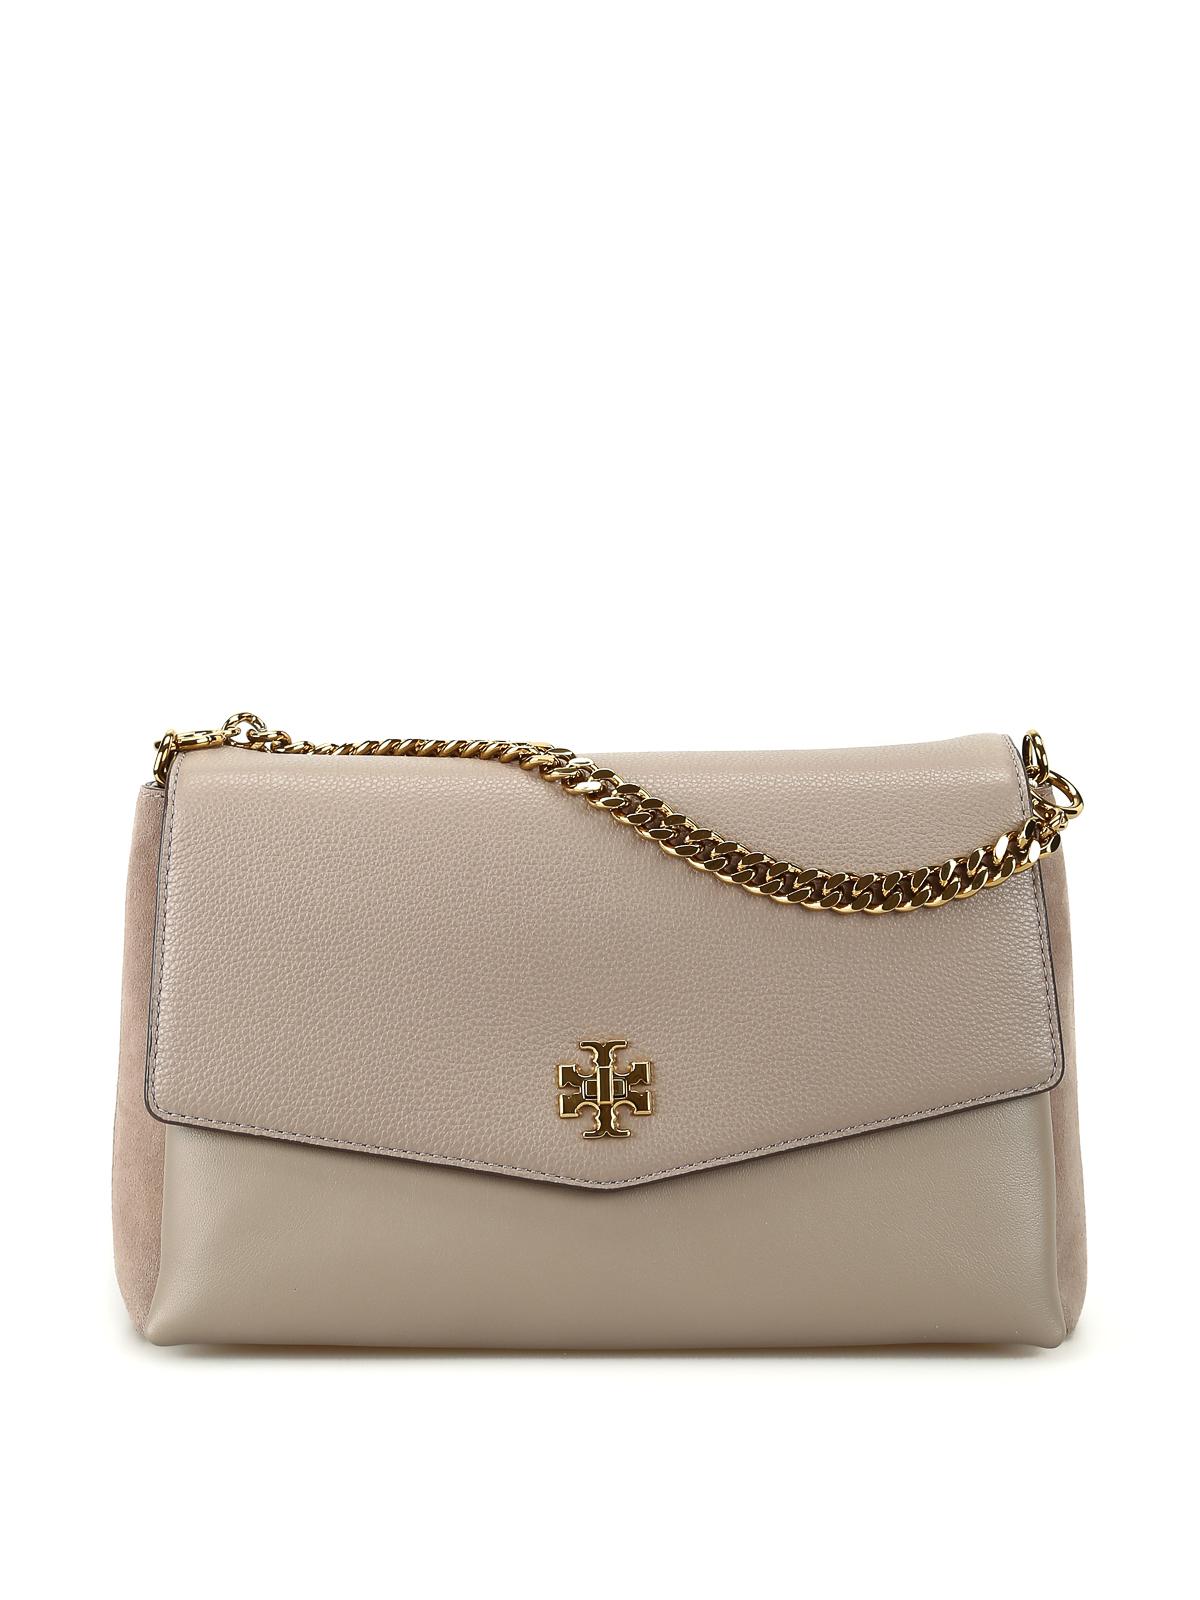 Tory Burch Kira Leather Shoulder Bag in Taupe (Natural) - Lyst